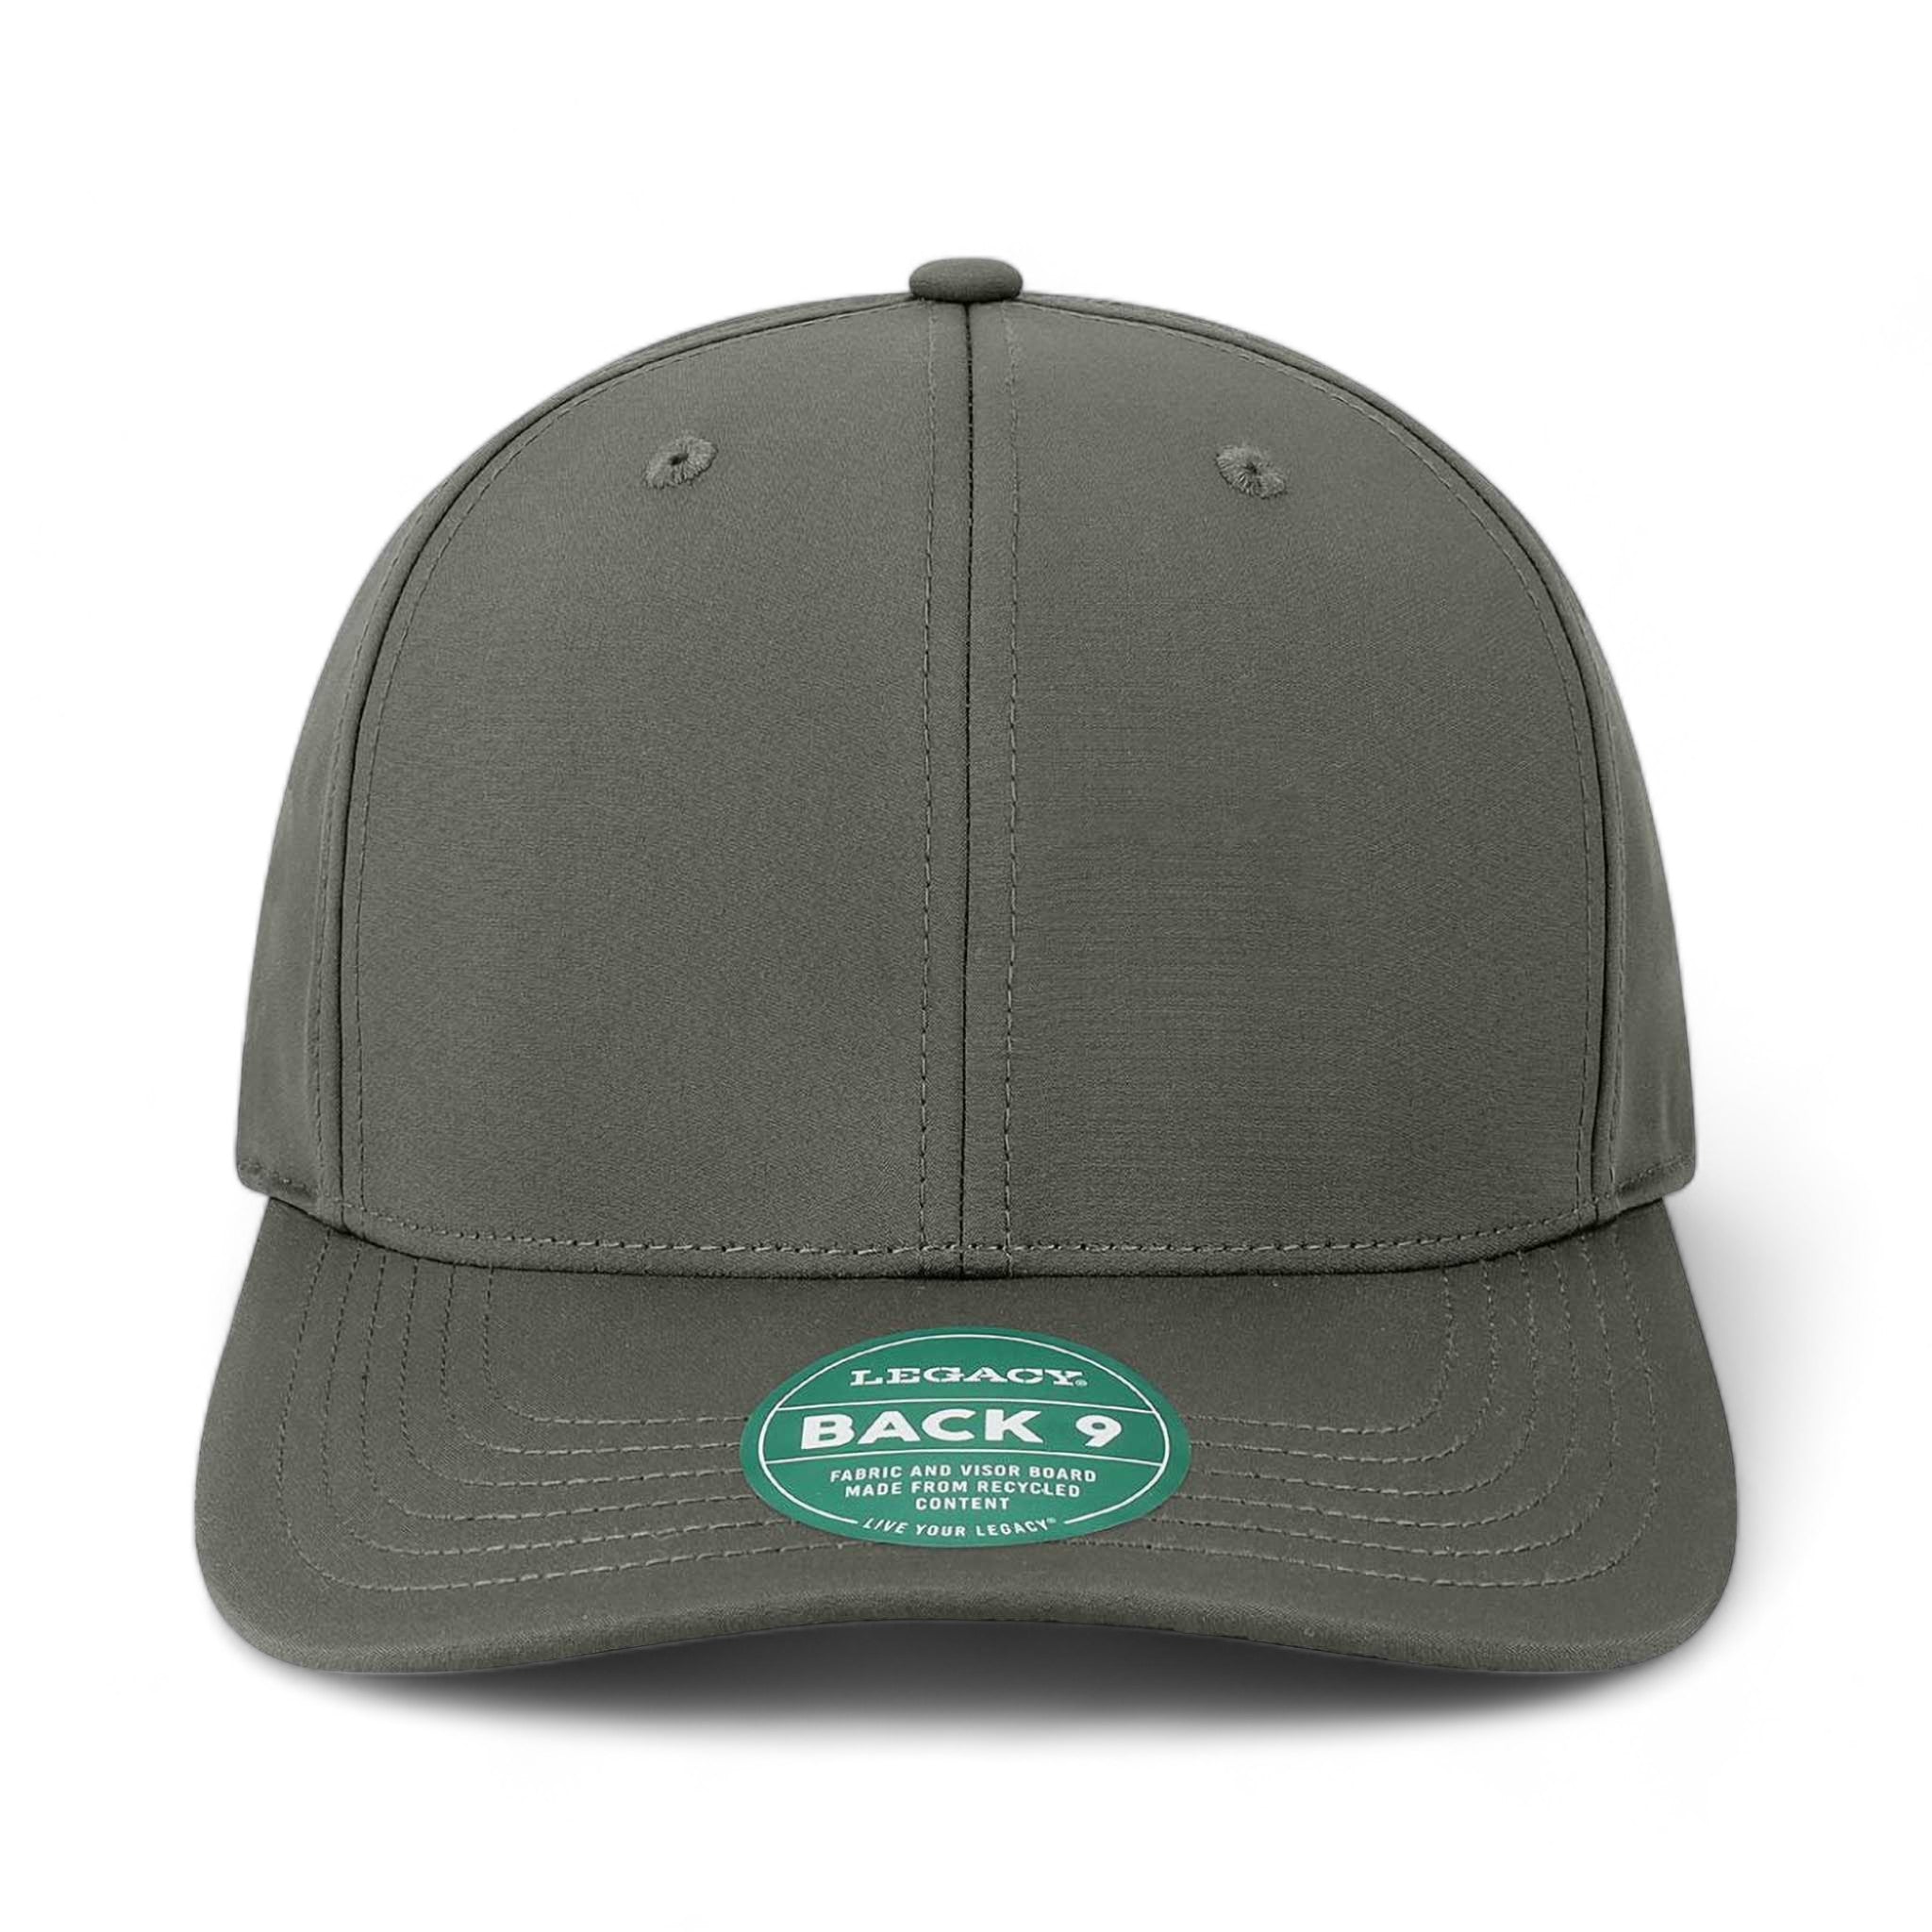 Front view of LEGACY B9A custom hat in dark grey